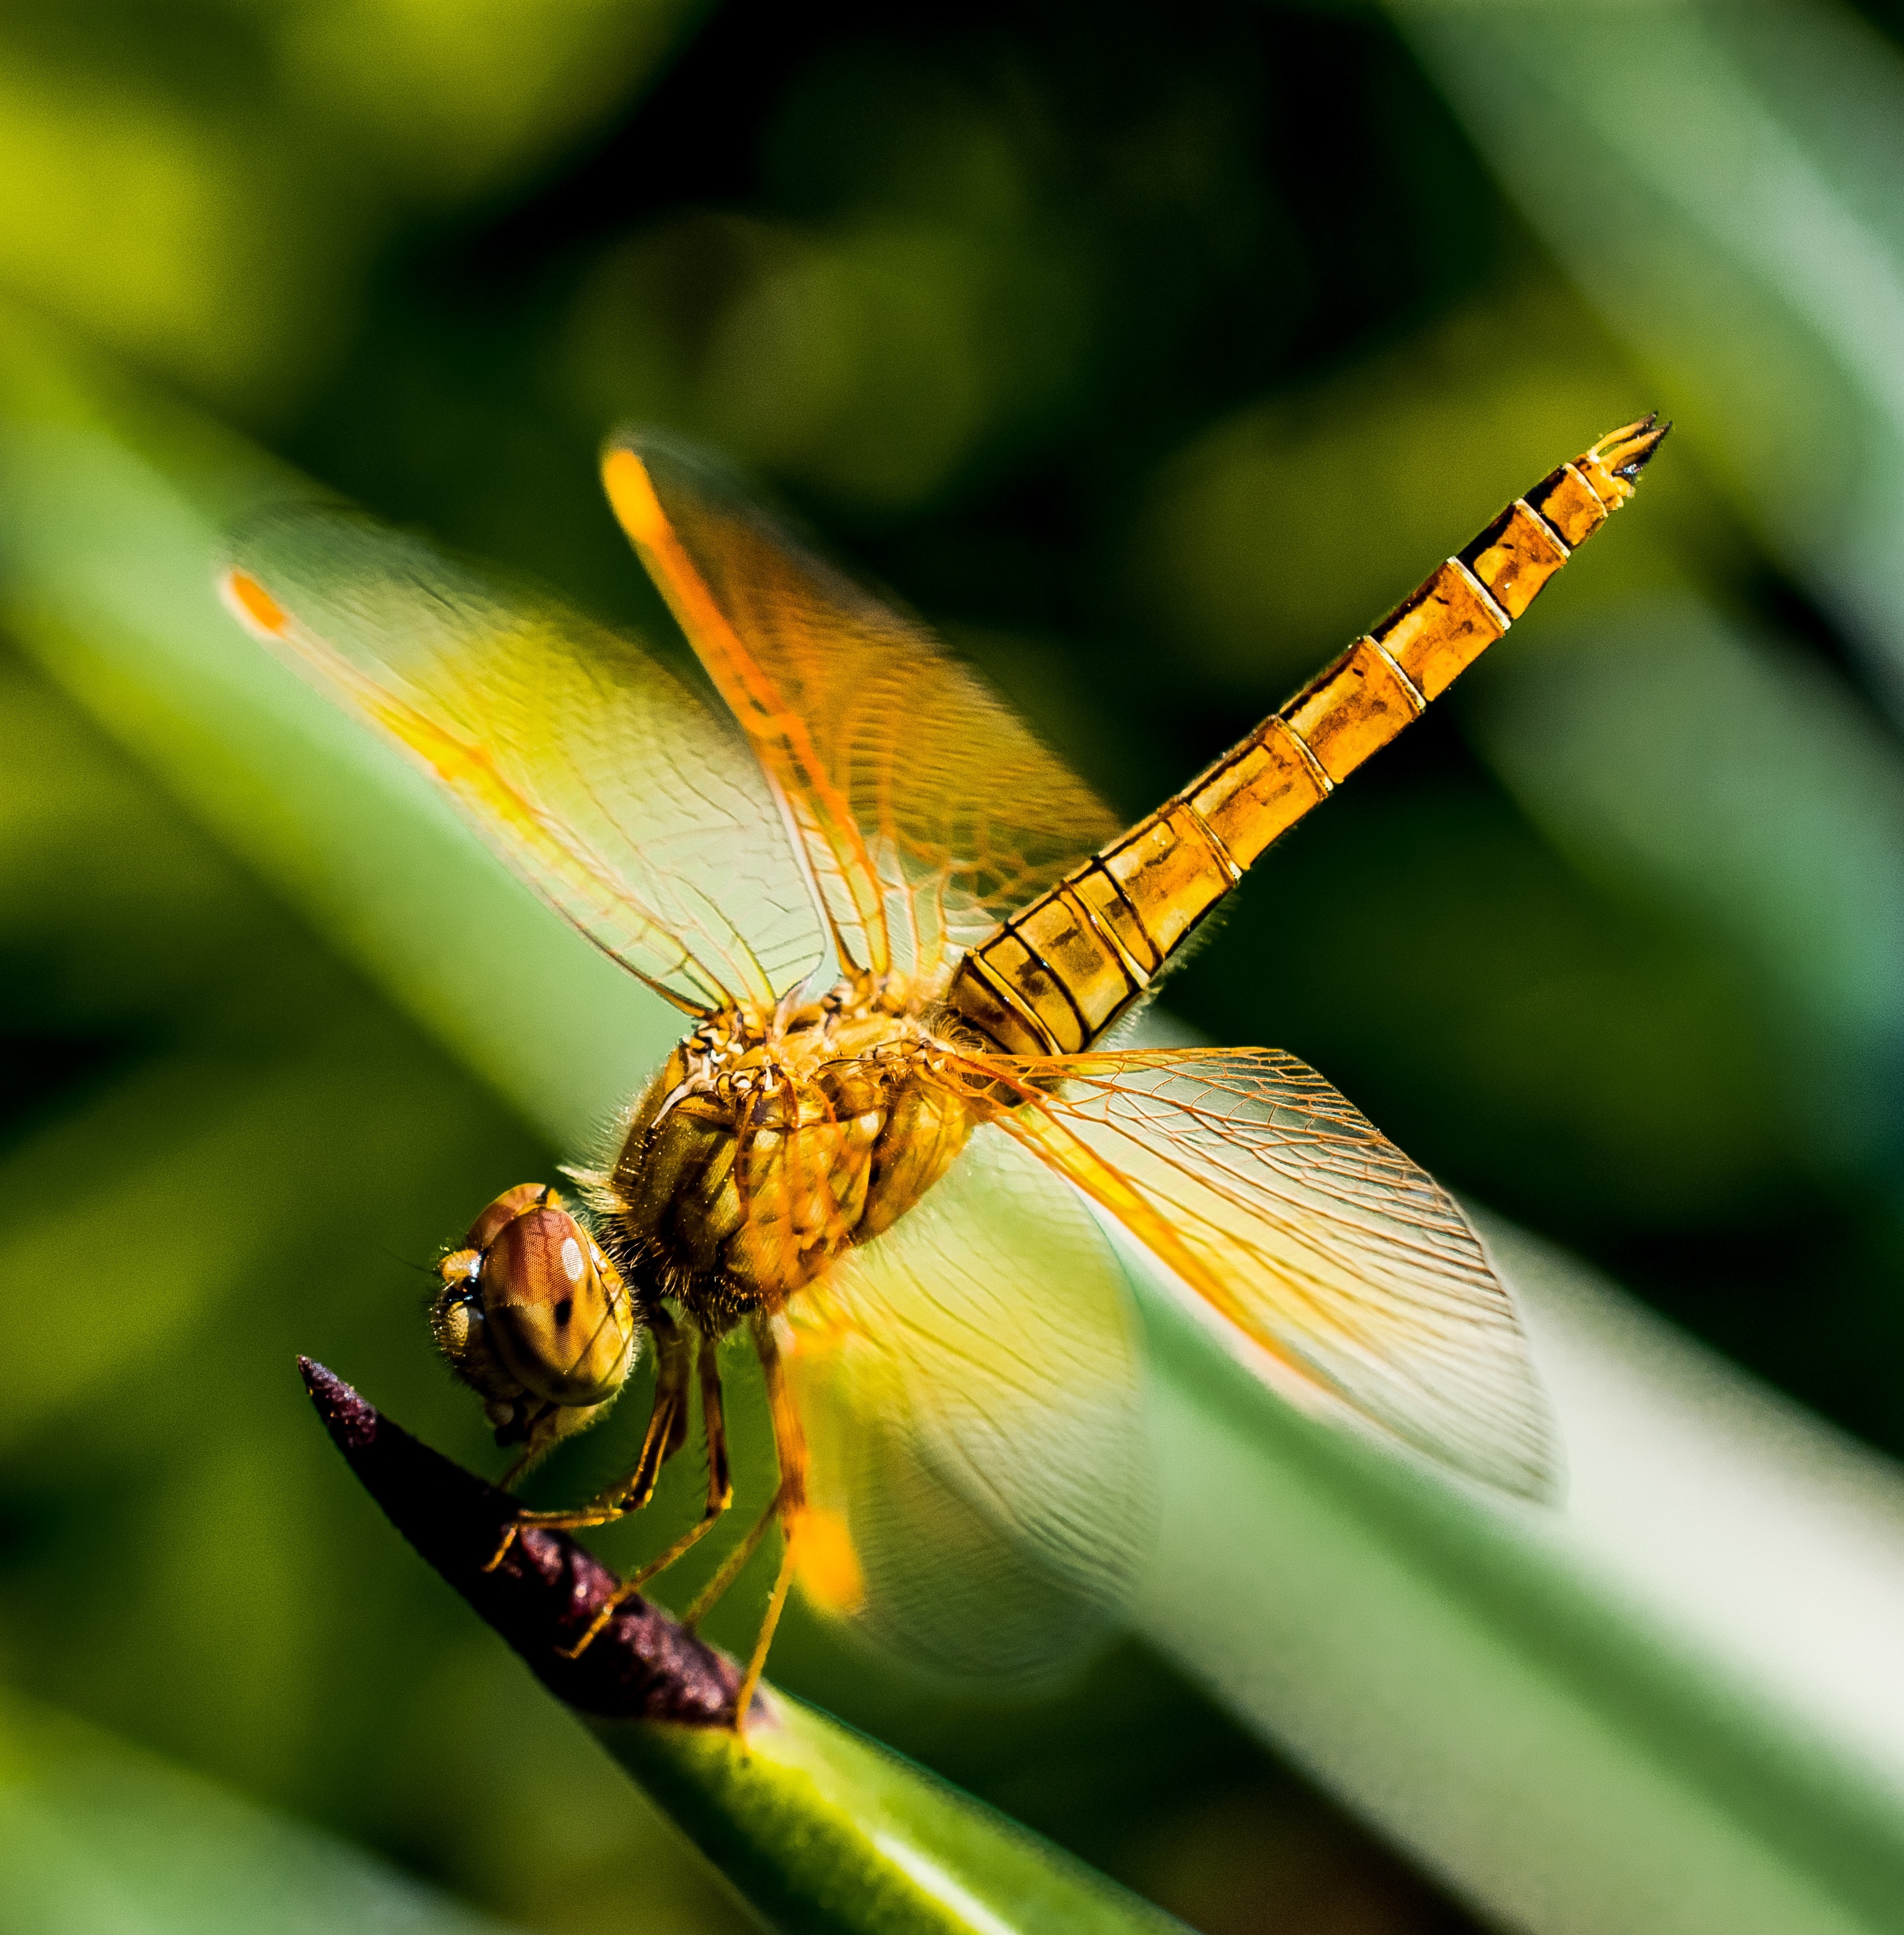 close up photo of gold-colored dragon fly